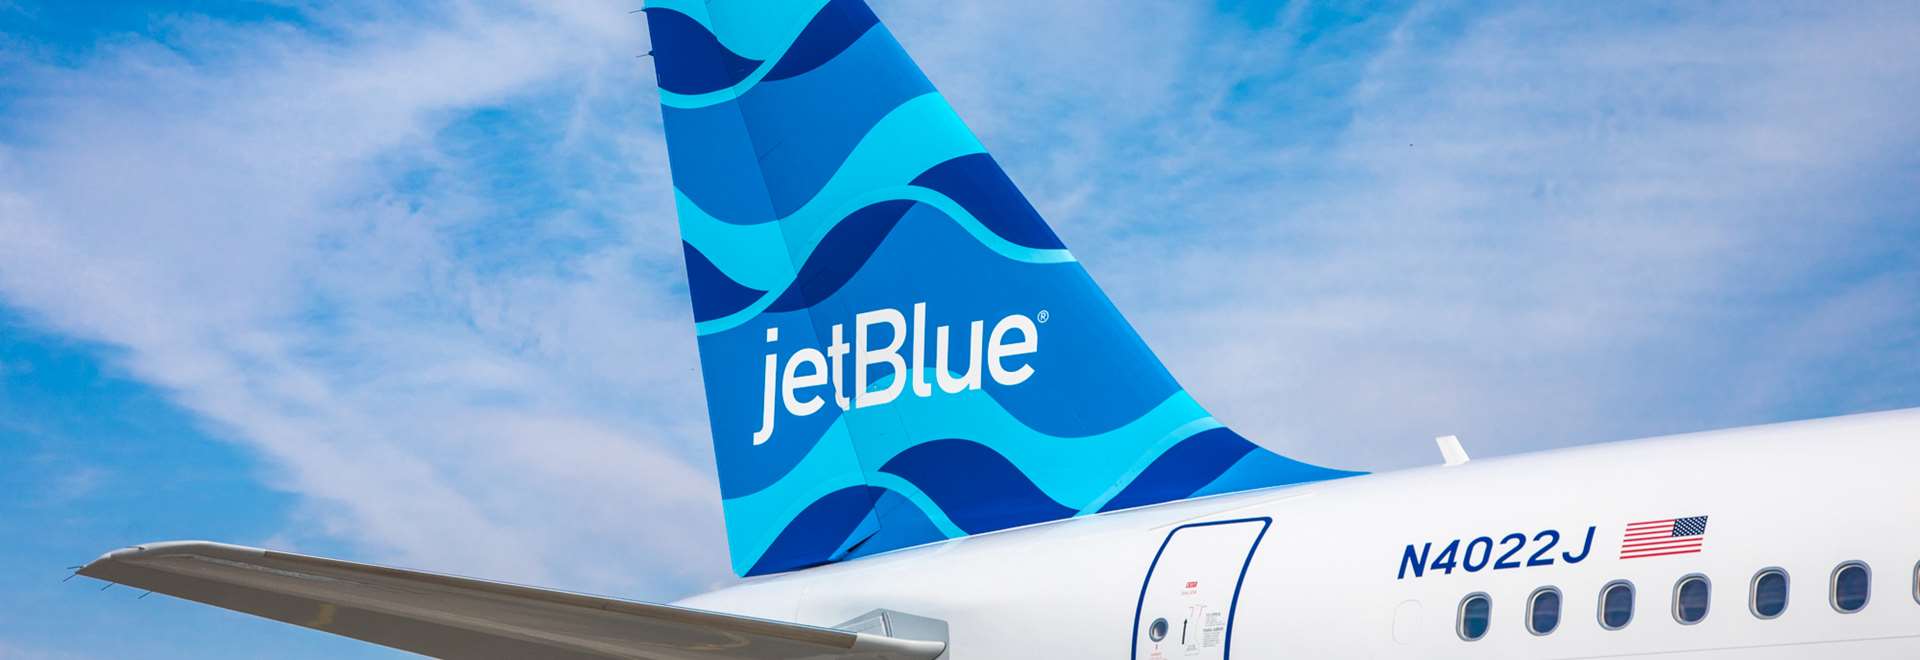 JetBlue Carry On Size, Fees & Limits Everything You Need to Know The